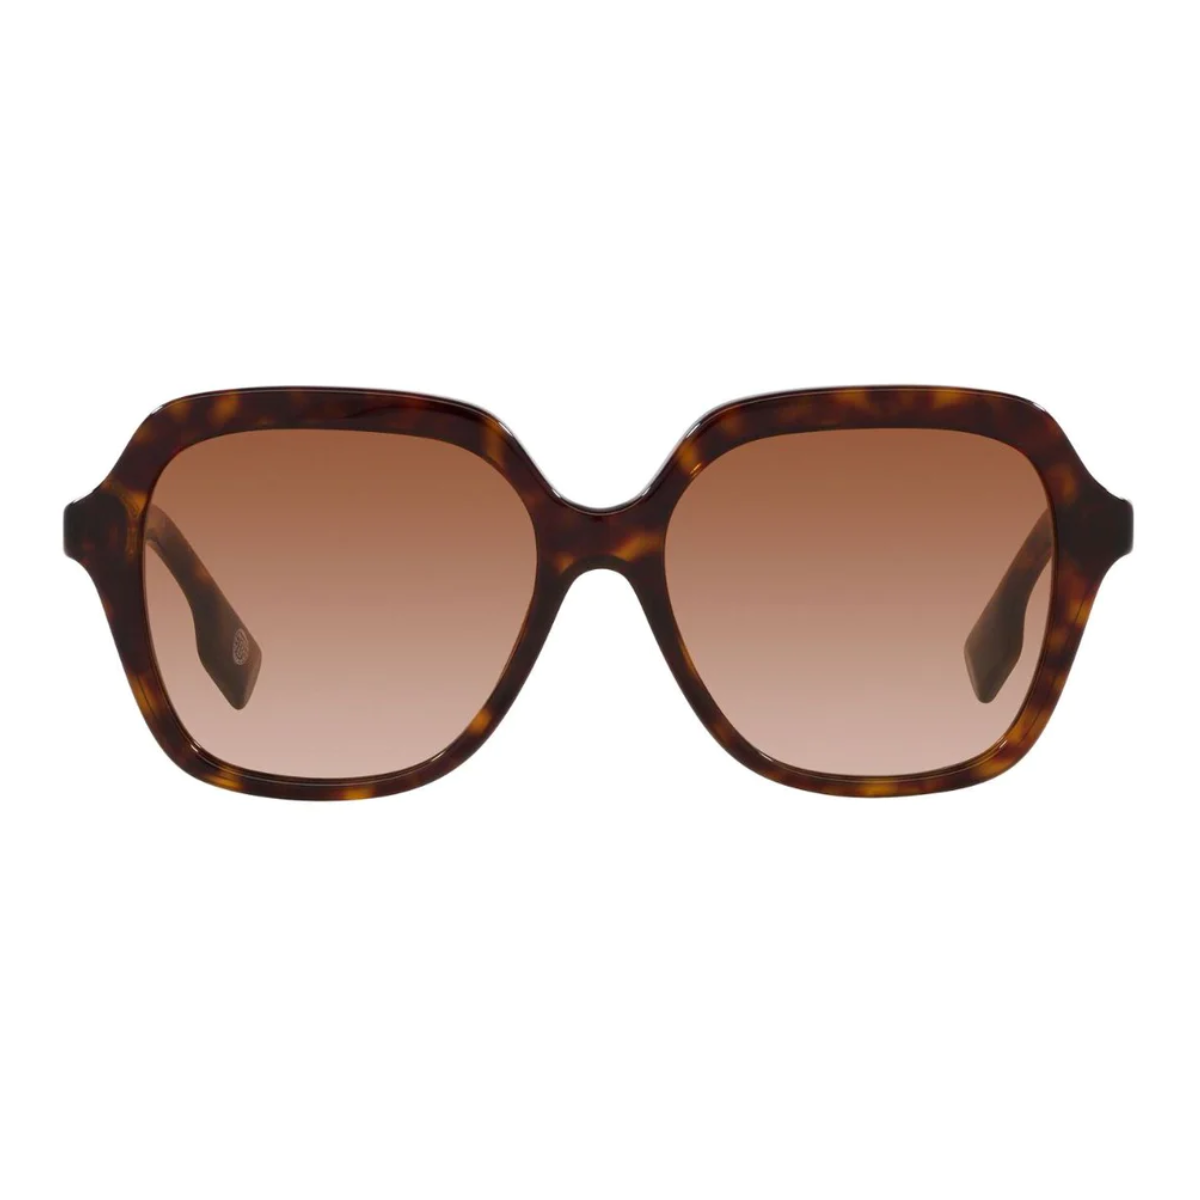 "Burberry 4389 3002/13 sunglasses offering elegance and UV protection, available at Optorium."